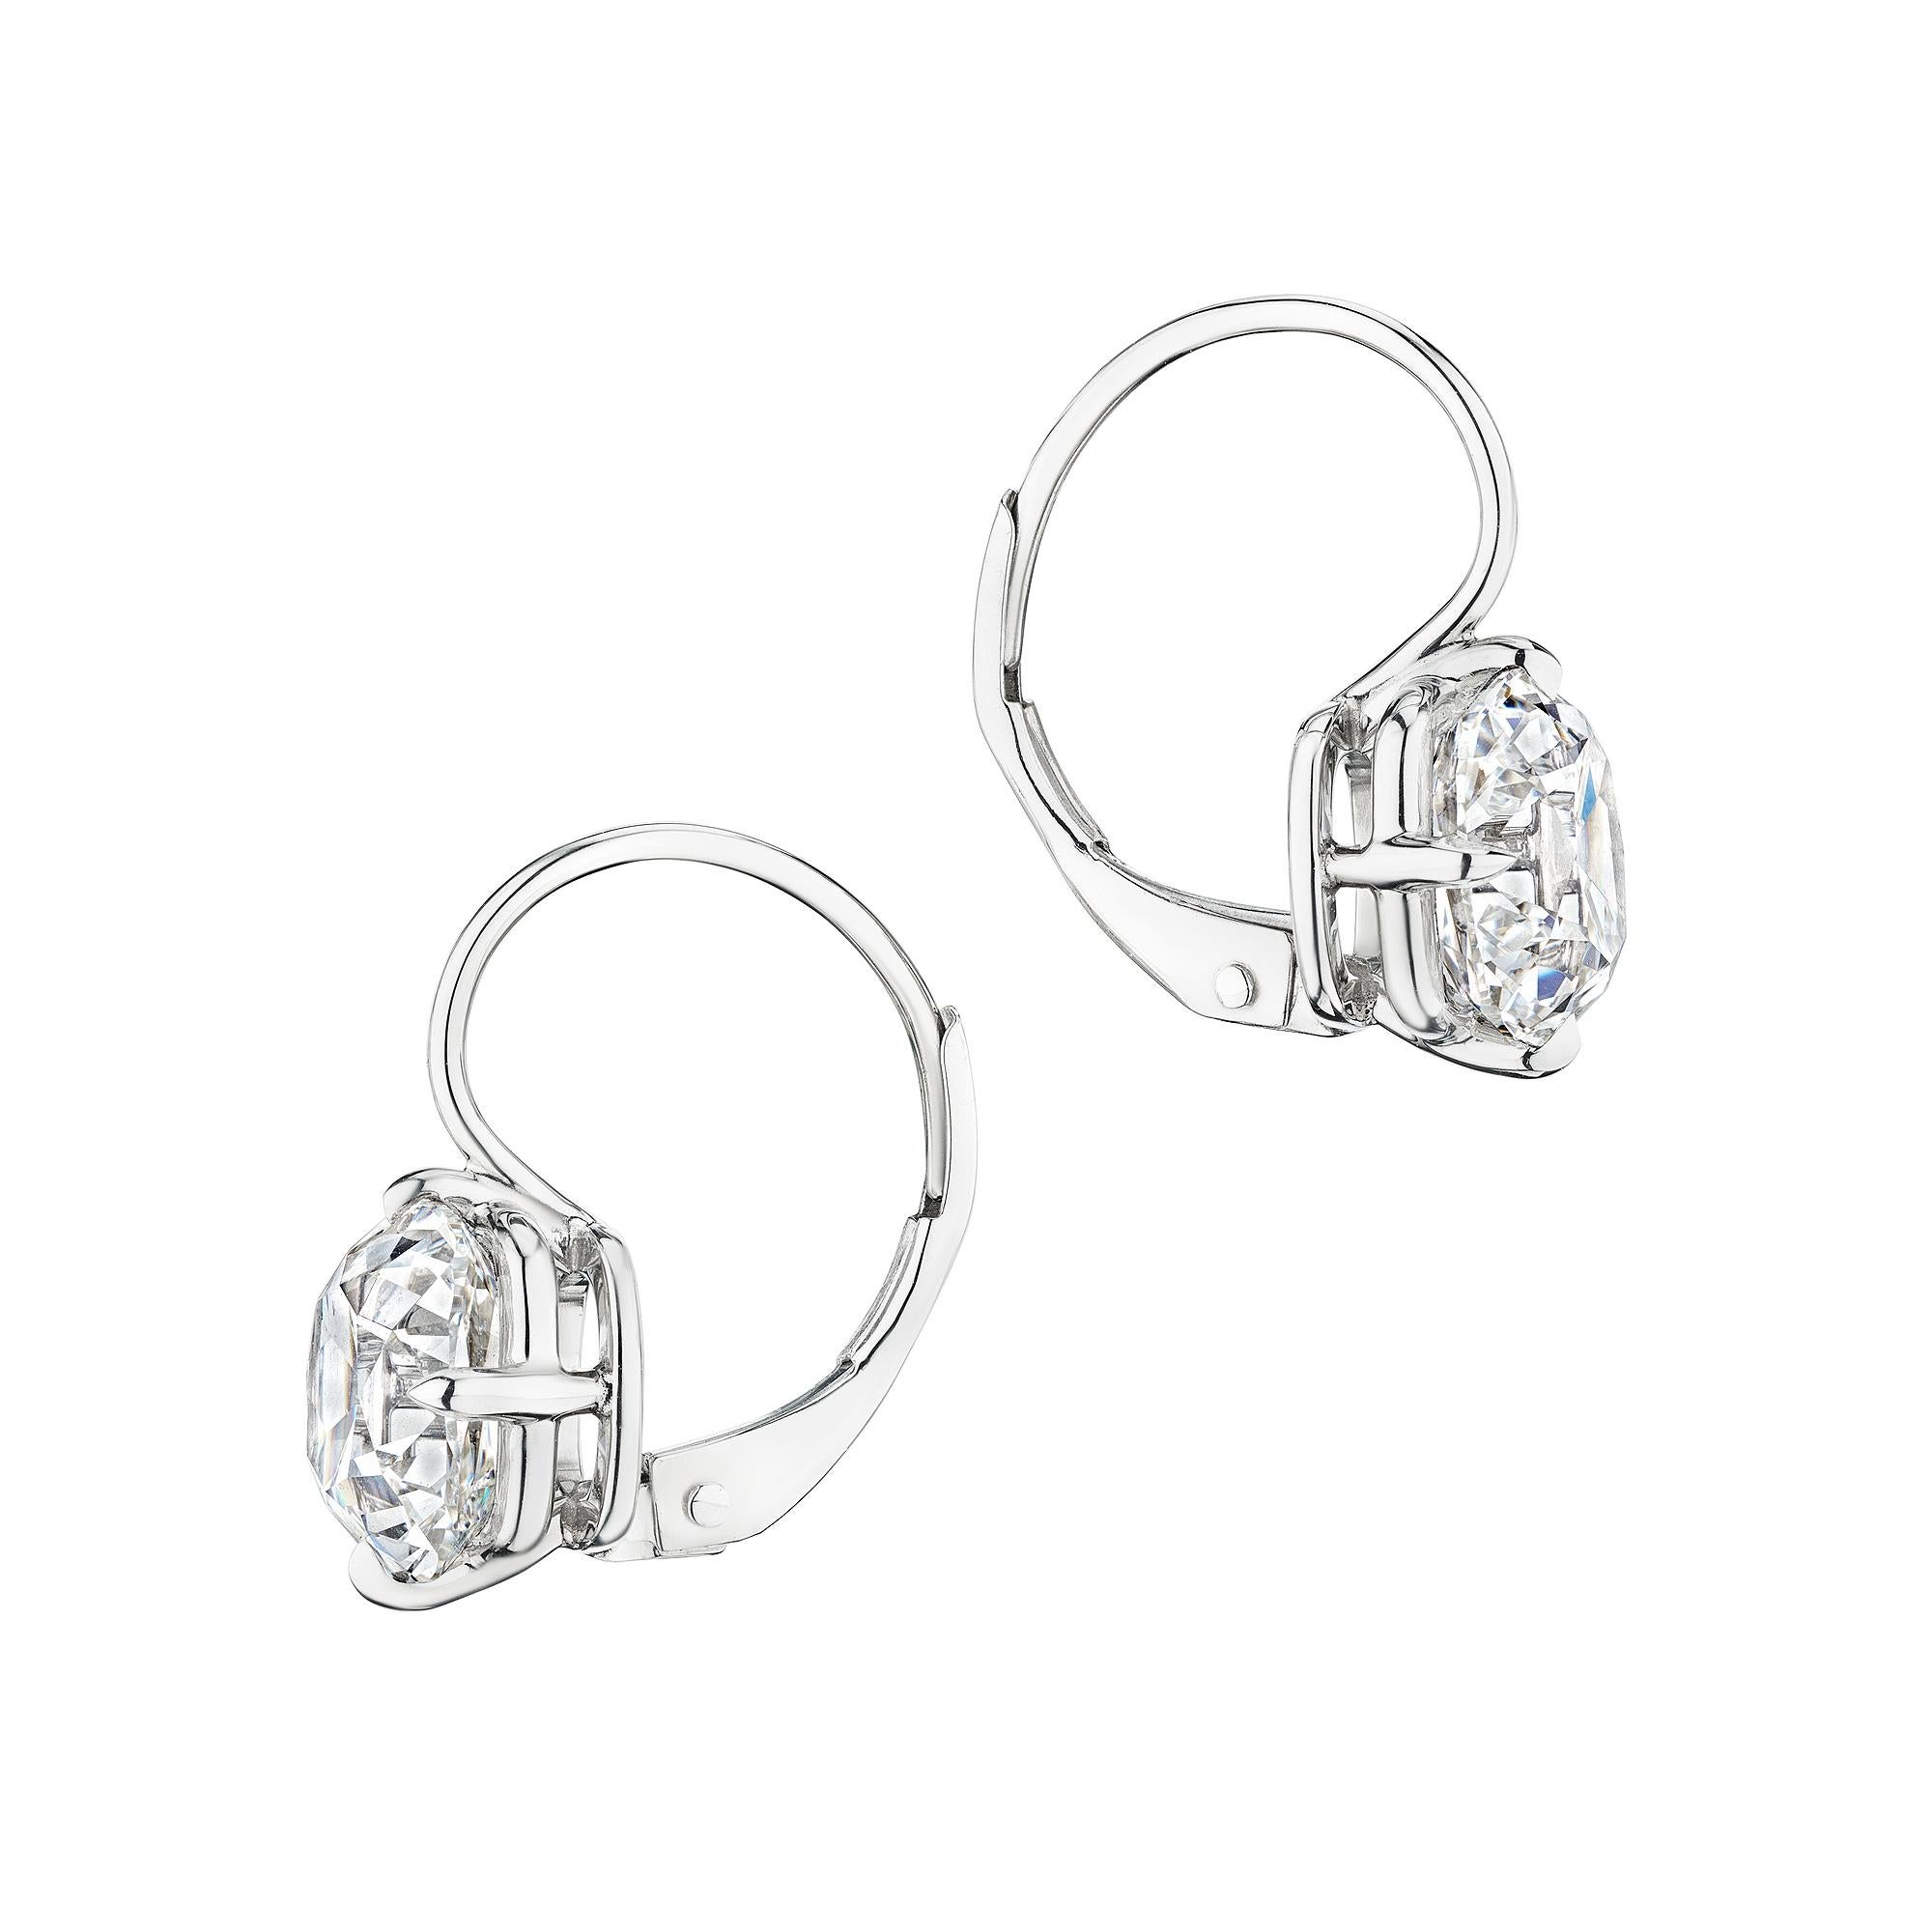 With modern and graphic lines, these 4.15 carat vintage cushion brilliant cut diamond platinum earrings are 24/7 chic. Diamond color F. Clarity VS1-2. GIA certified #5231056789 and #5234056649. Designed by Steven Fox Jewelry. Lever backs. 5/8